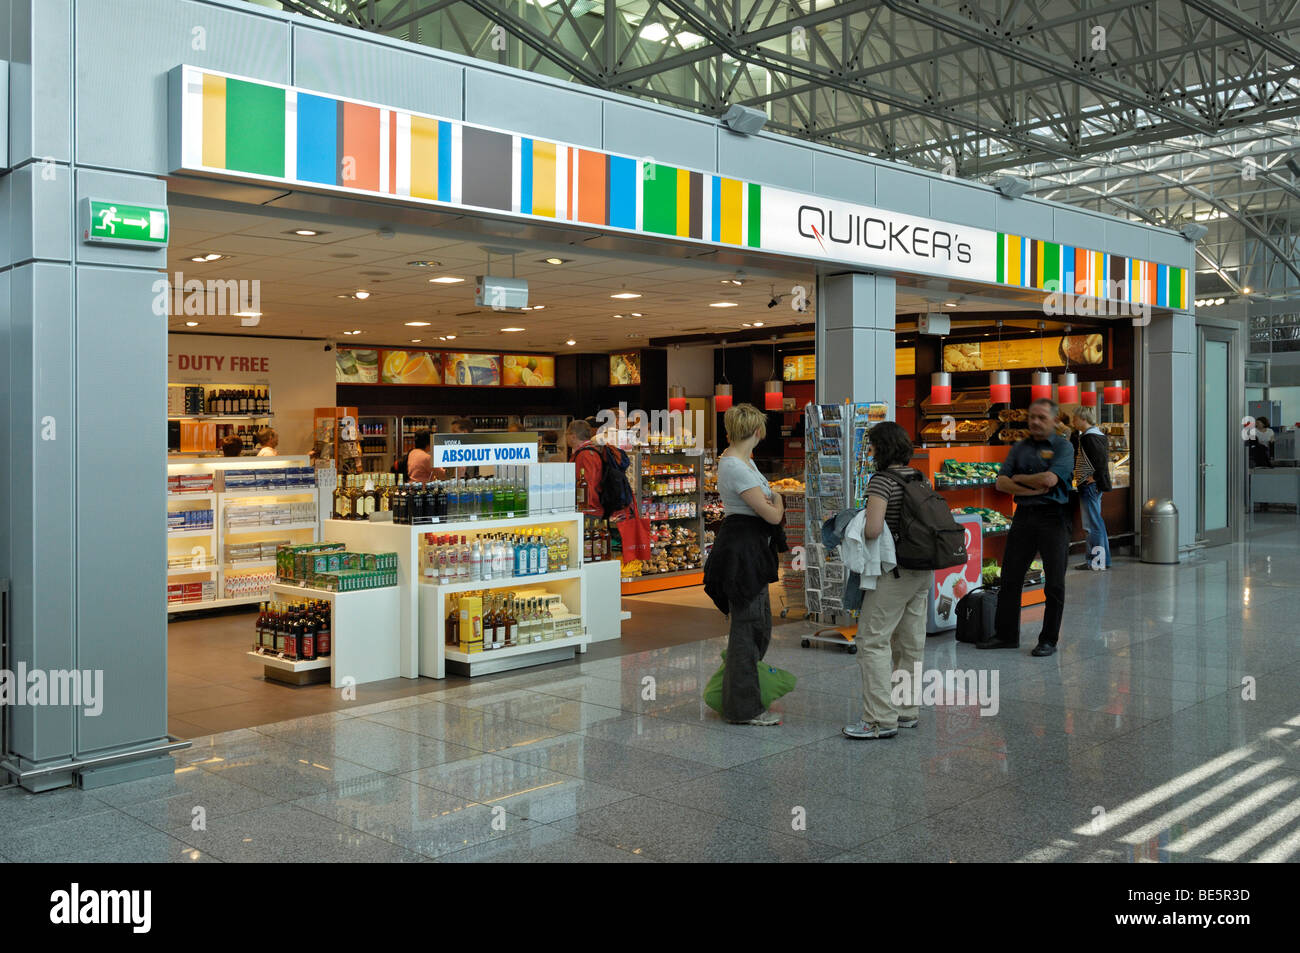 Dutyfree High Resolution Stock Photography and Images - Alamy